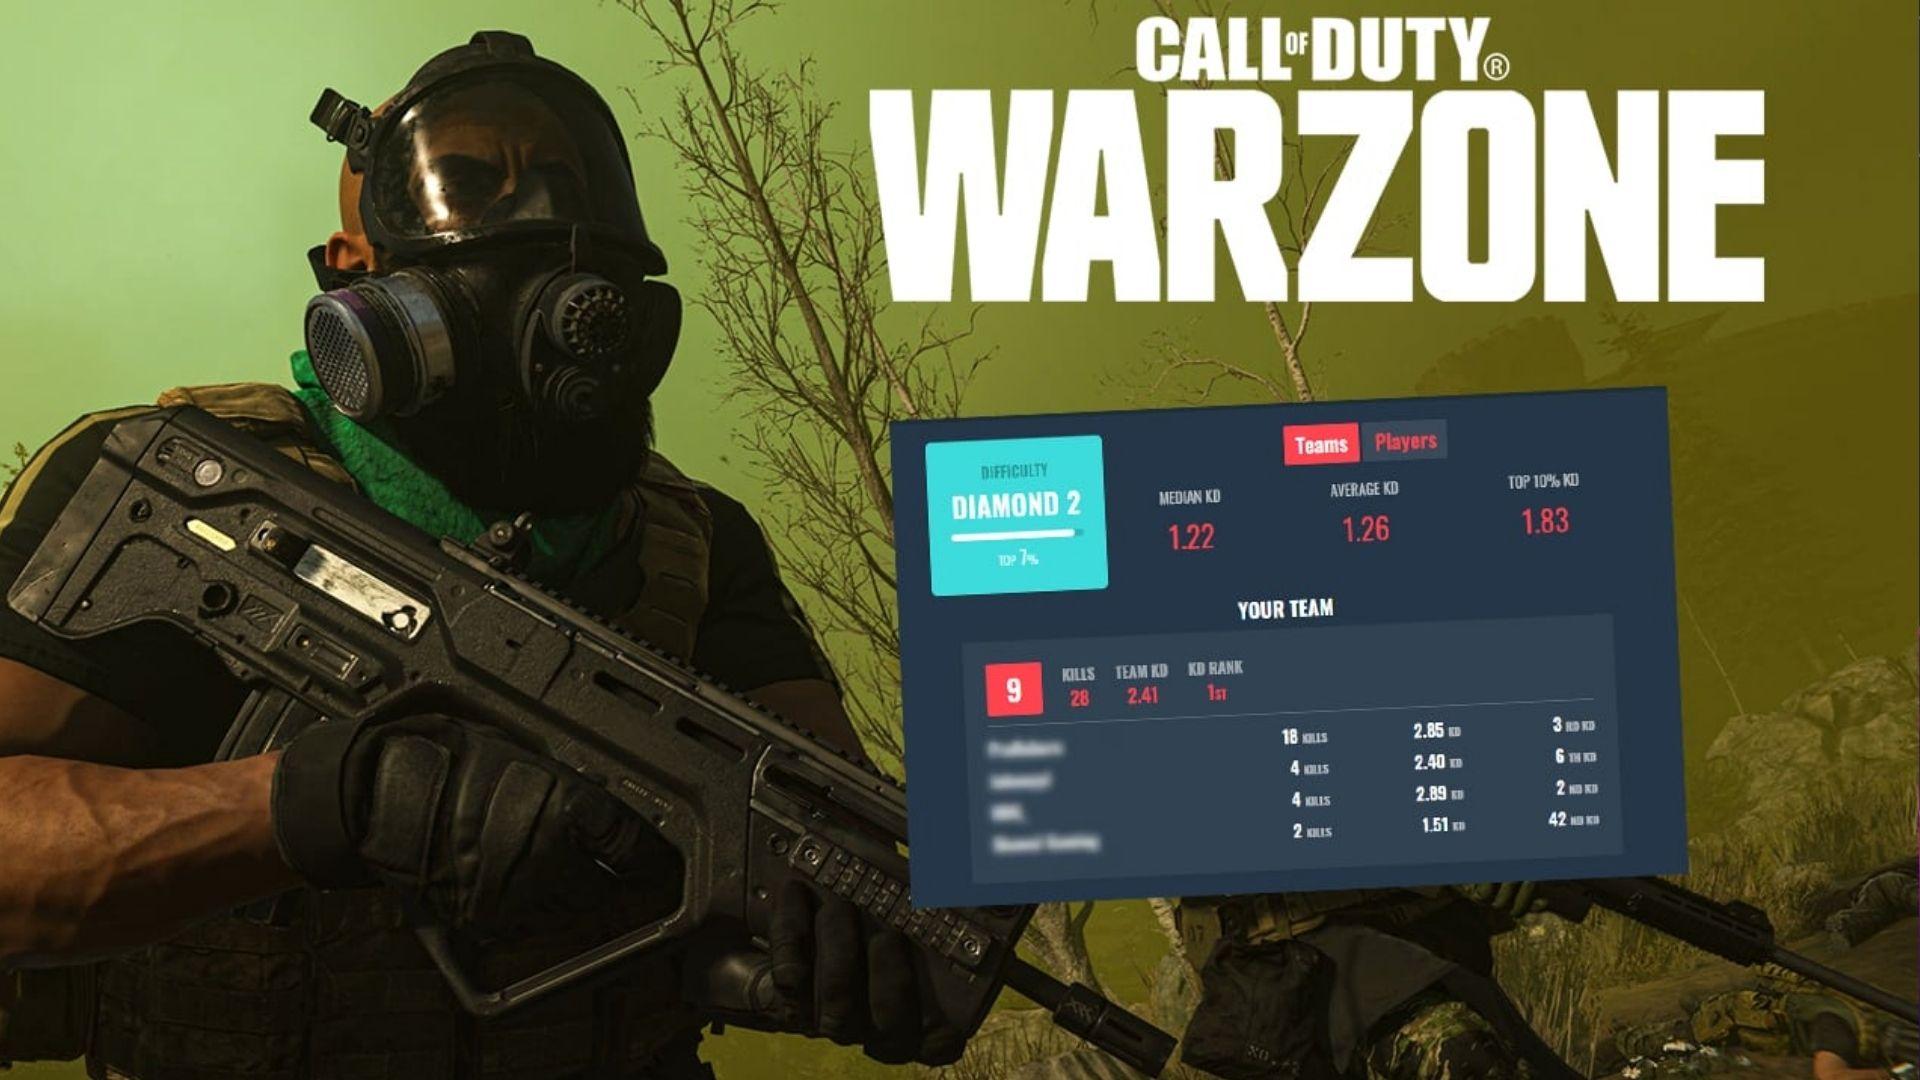 All Call of Duty Discounts in the Battle.net Summer Sale - COD Warzone  Tracker